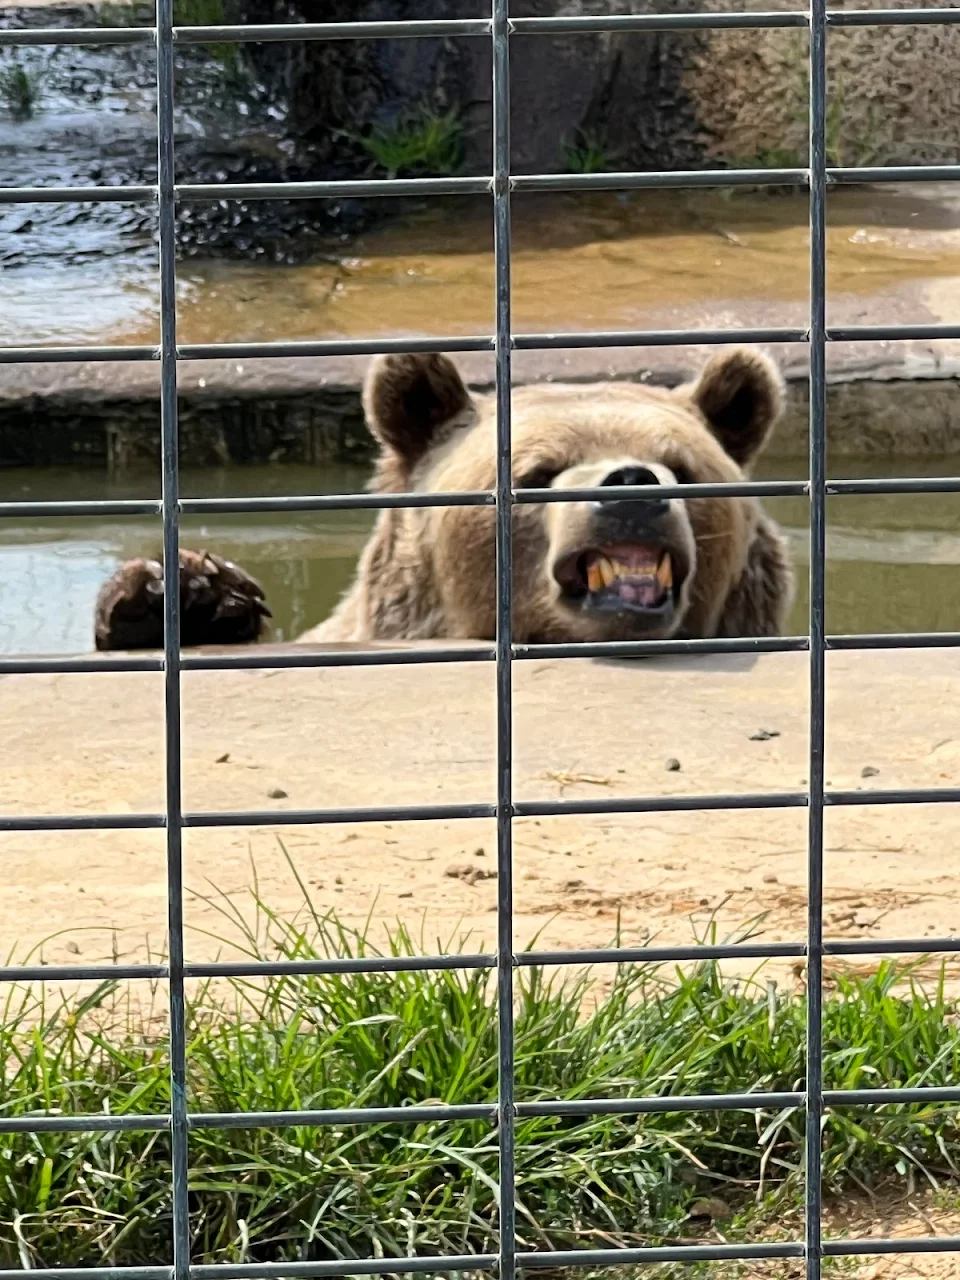 Bear at zoo who “smiles” for the cameras